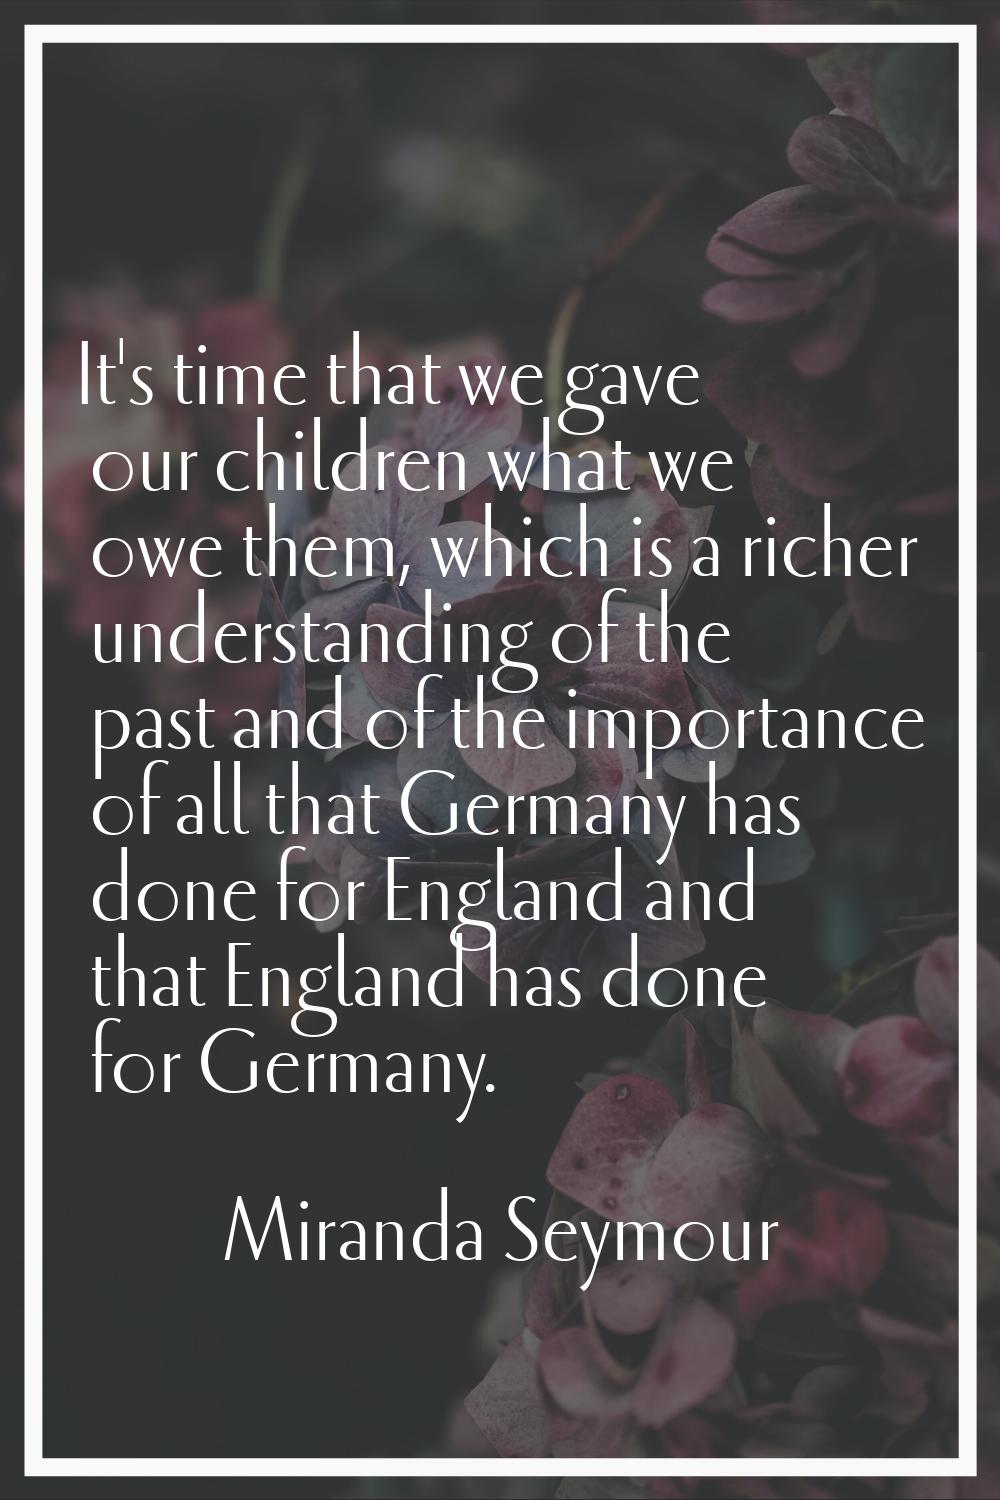 It's time that we gave our children what we owe them, which is a richer understanding of the past a